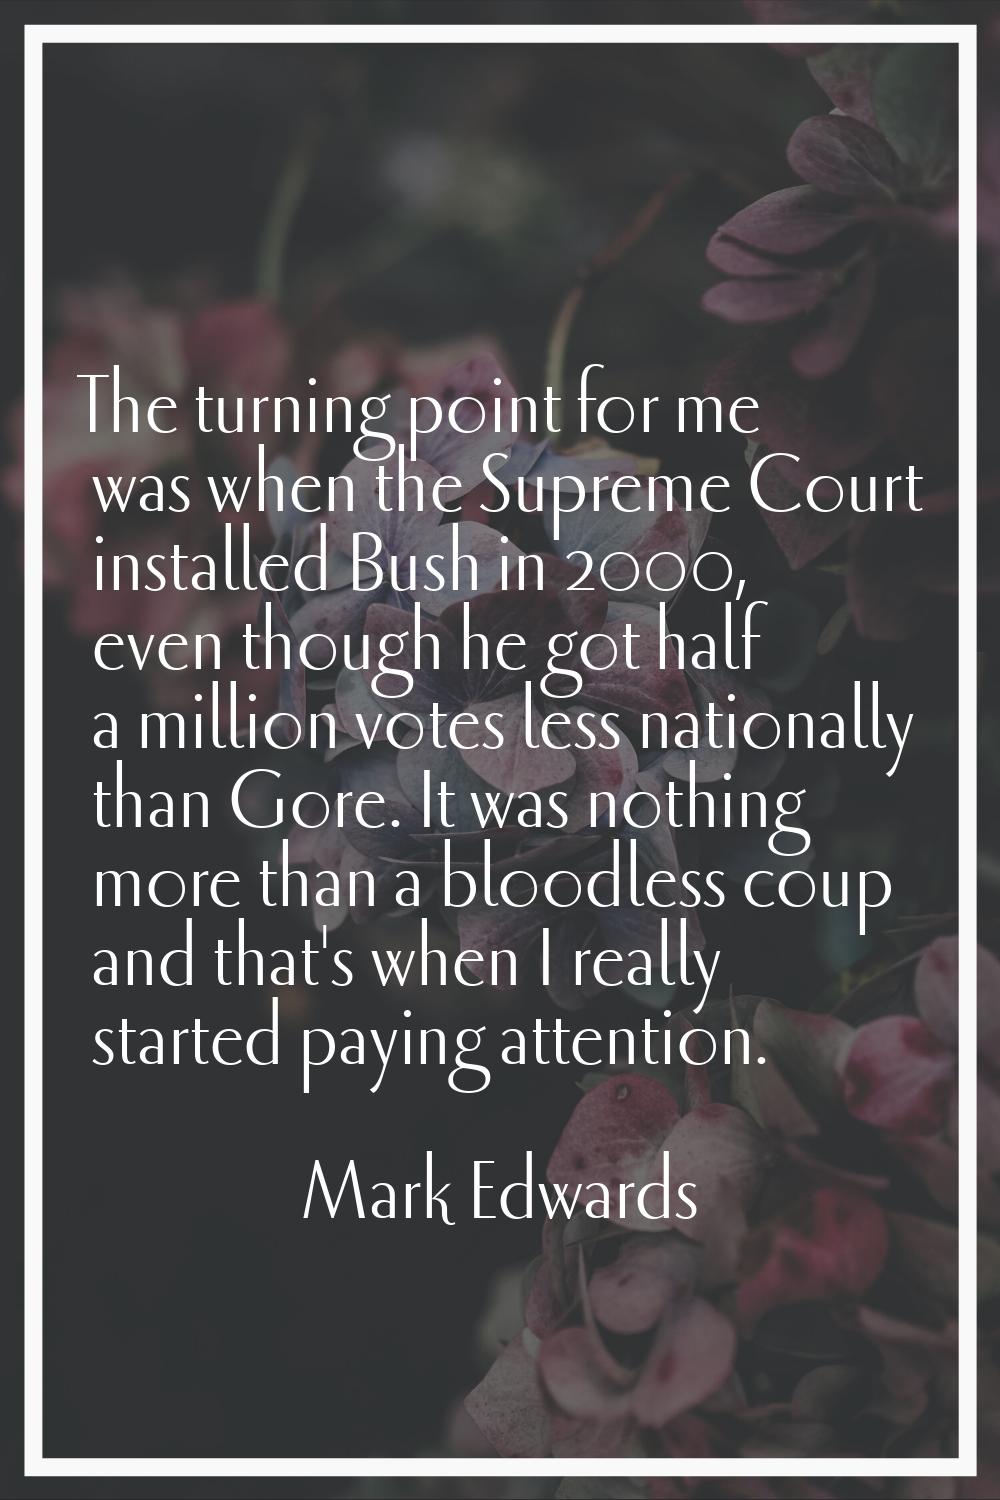 The turning point for me was when the Supreme Court installed Bush in 2000, even though he got half